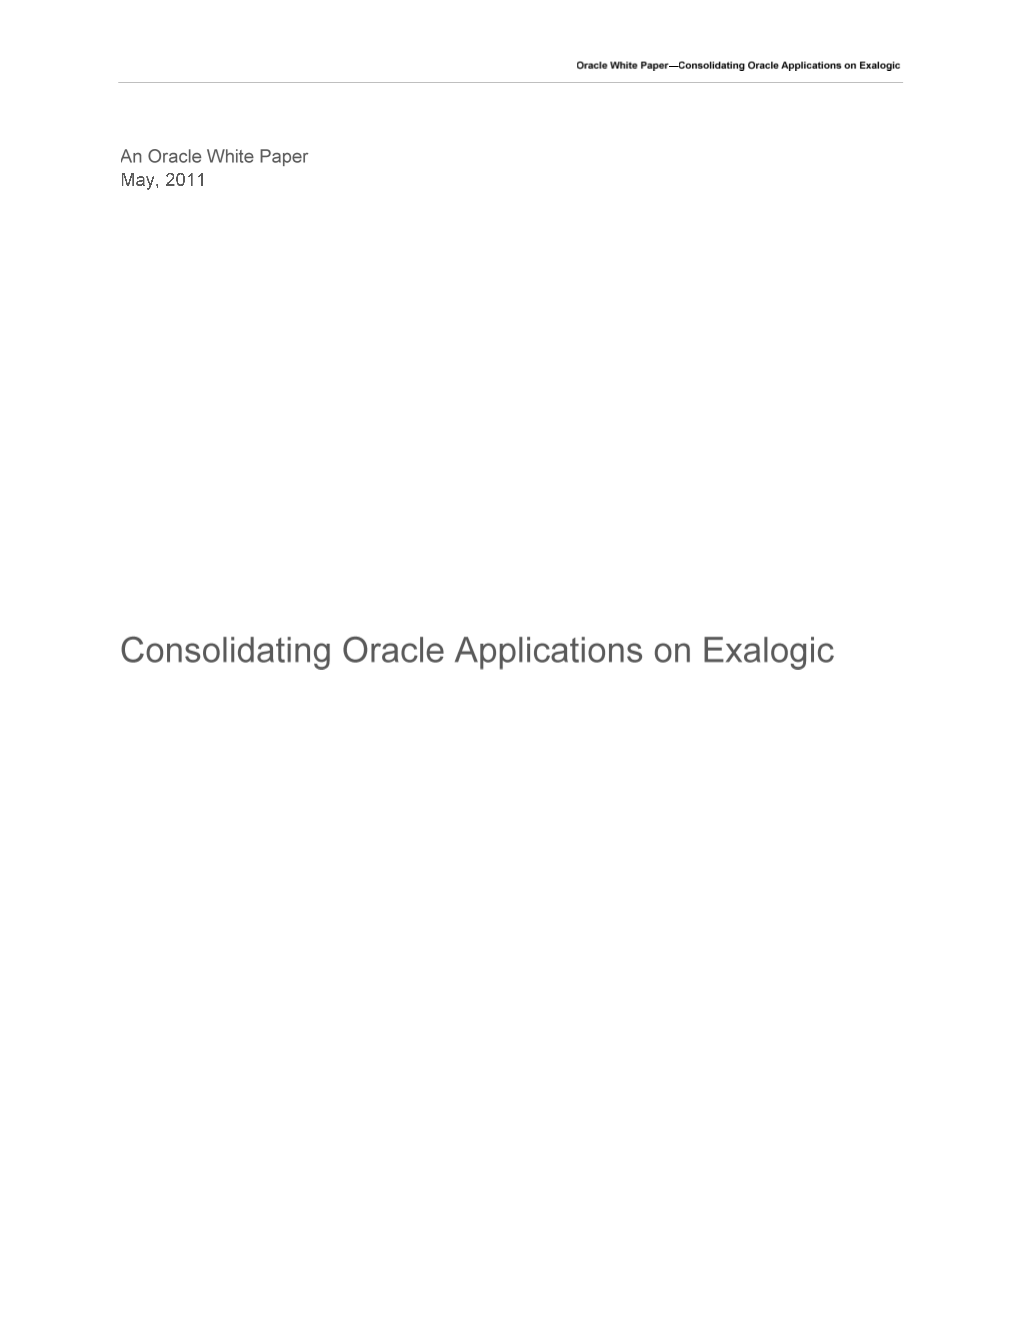 Consolidating Oracle Applications on Exalogic